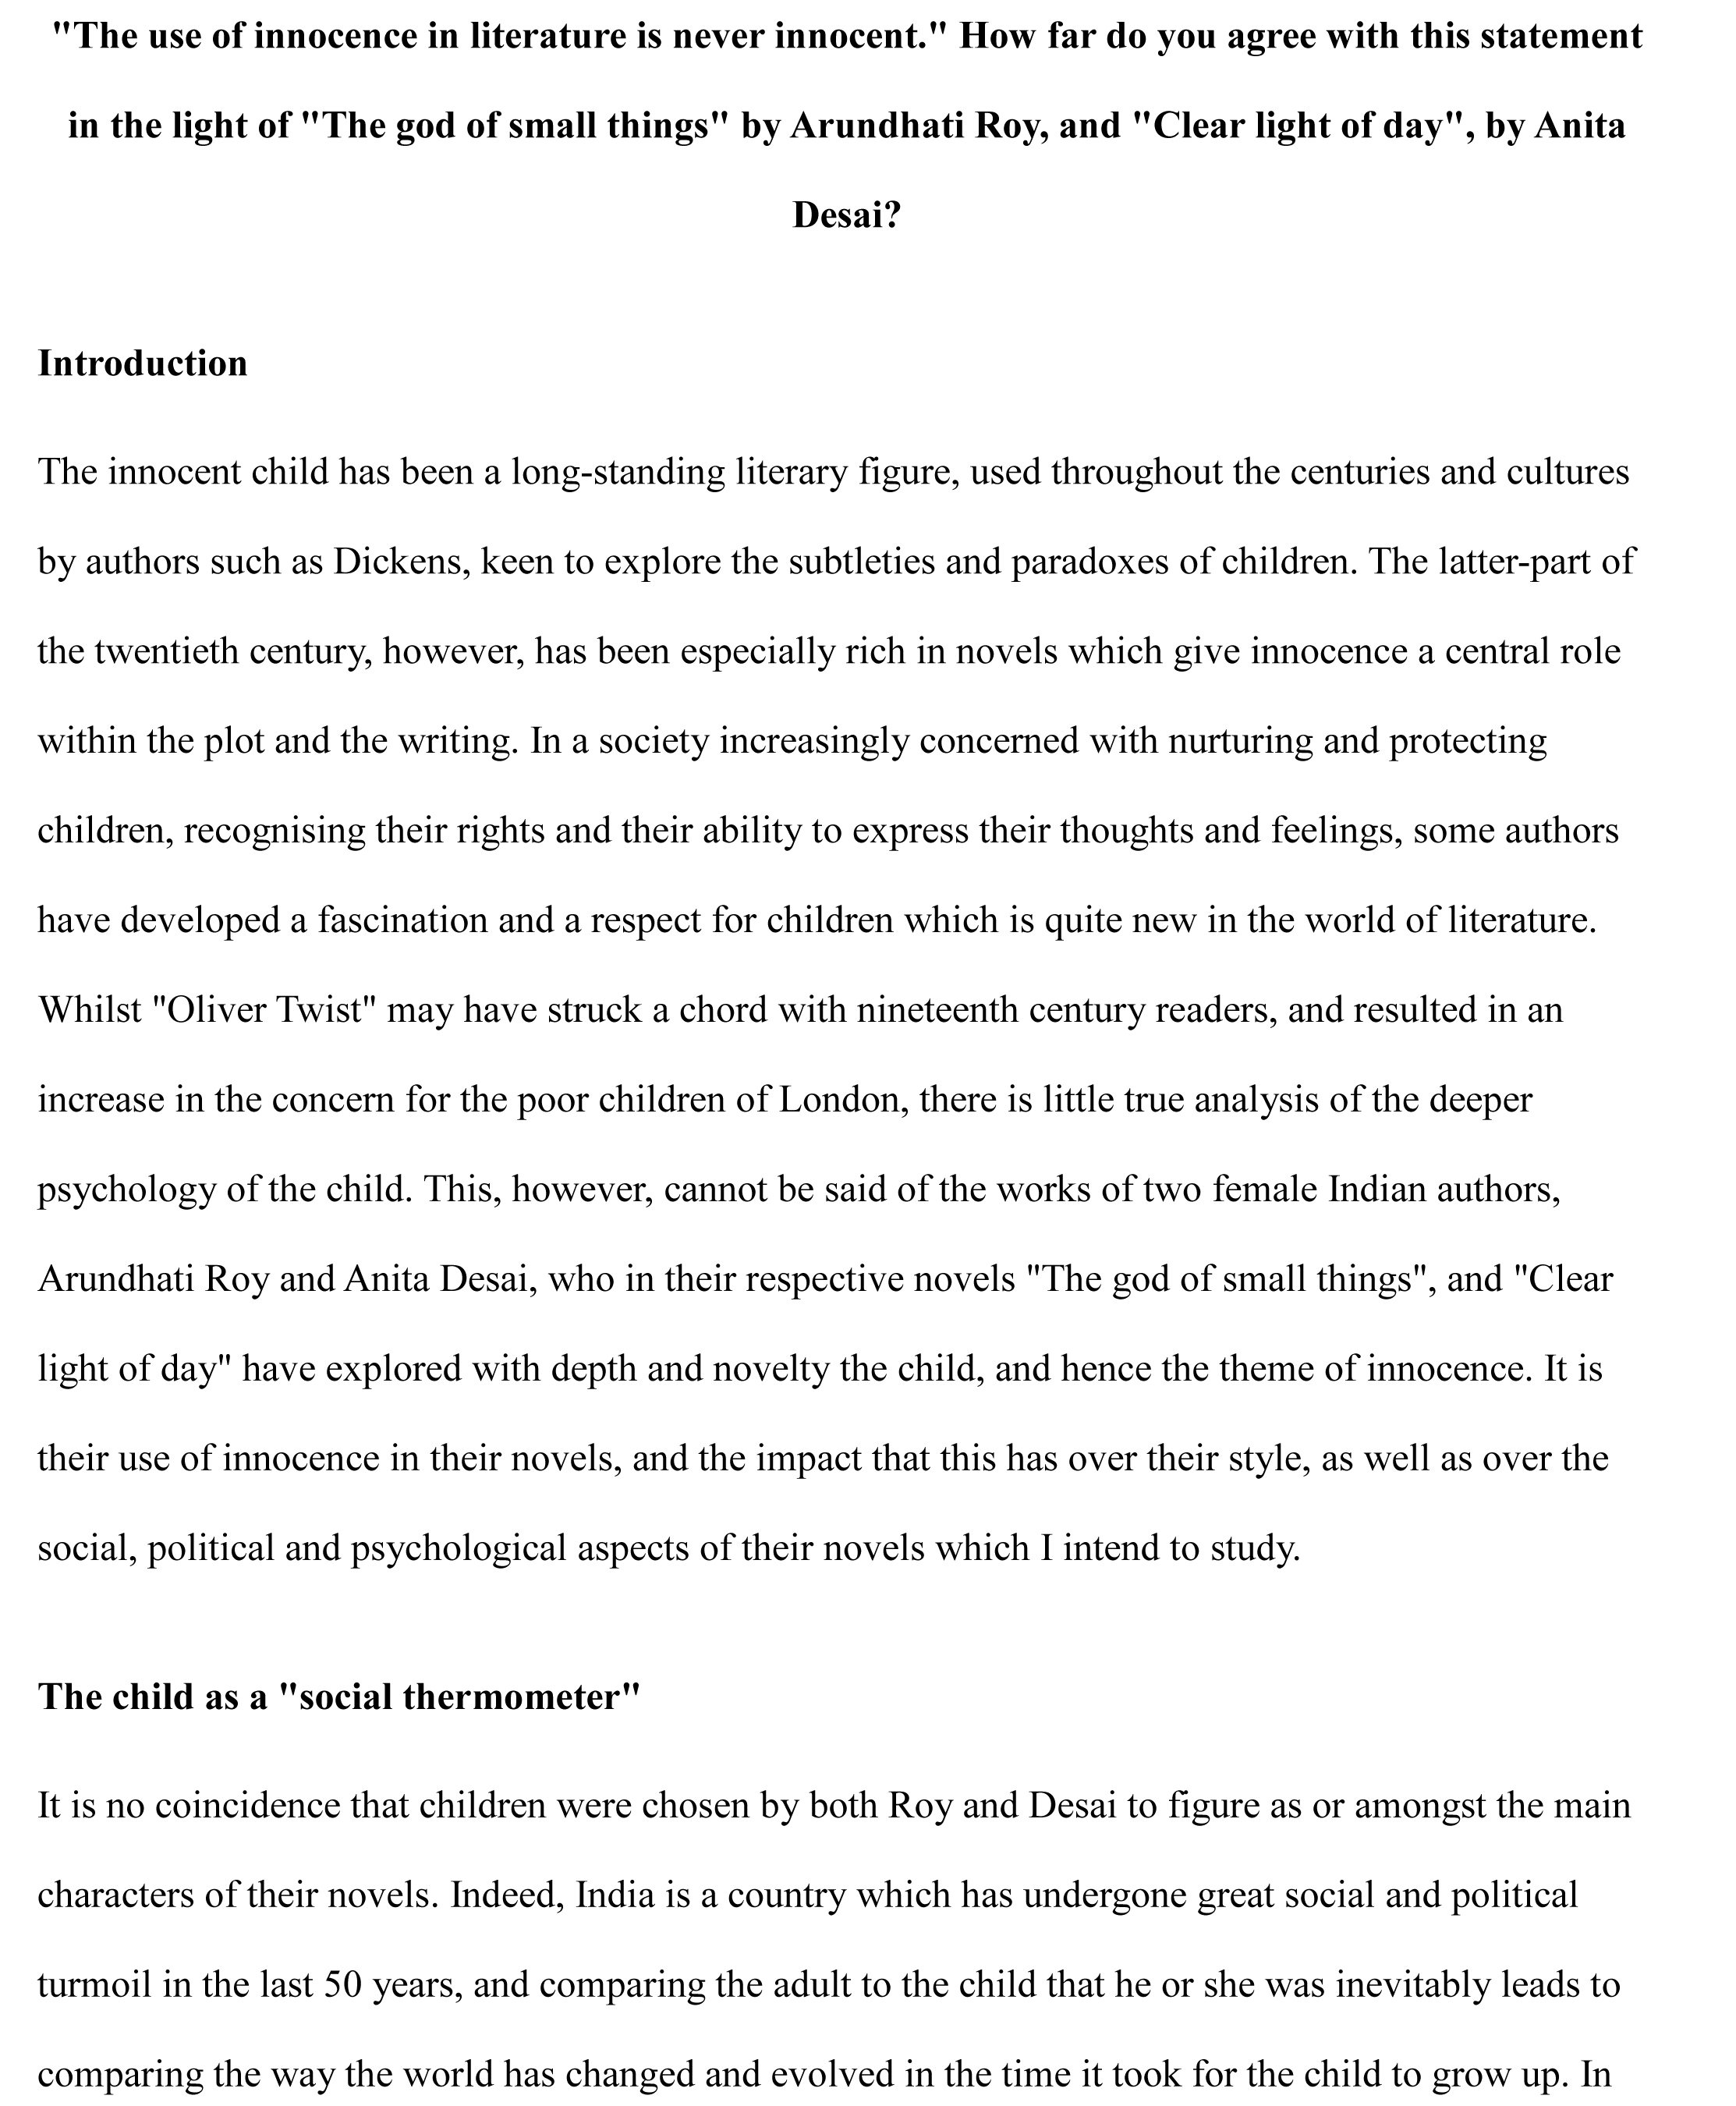 Mla compare and contrast essay template